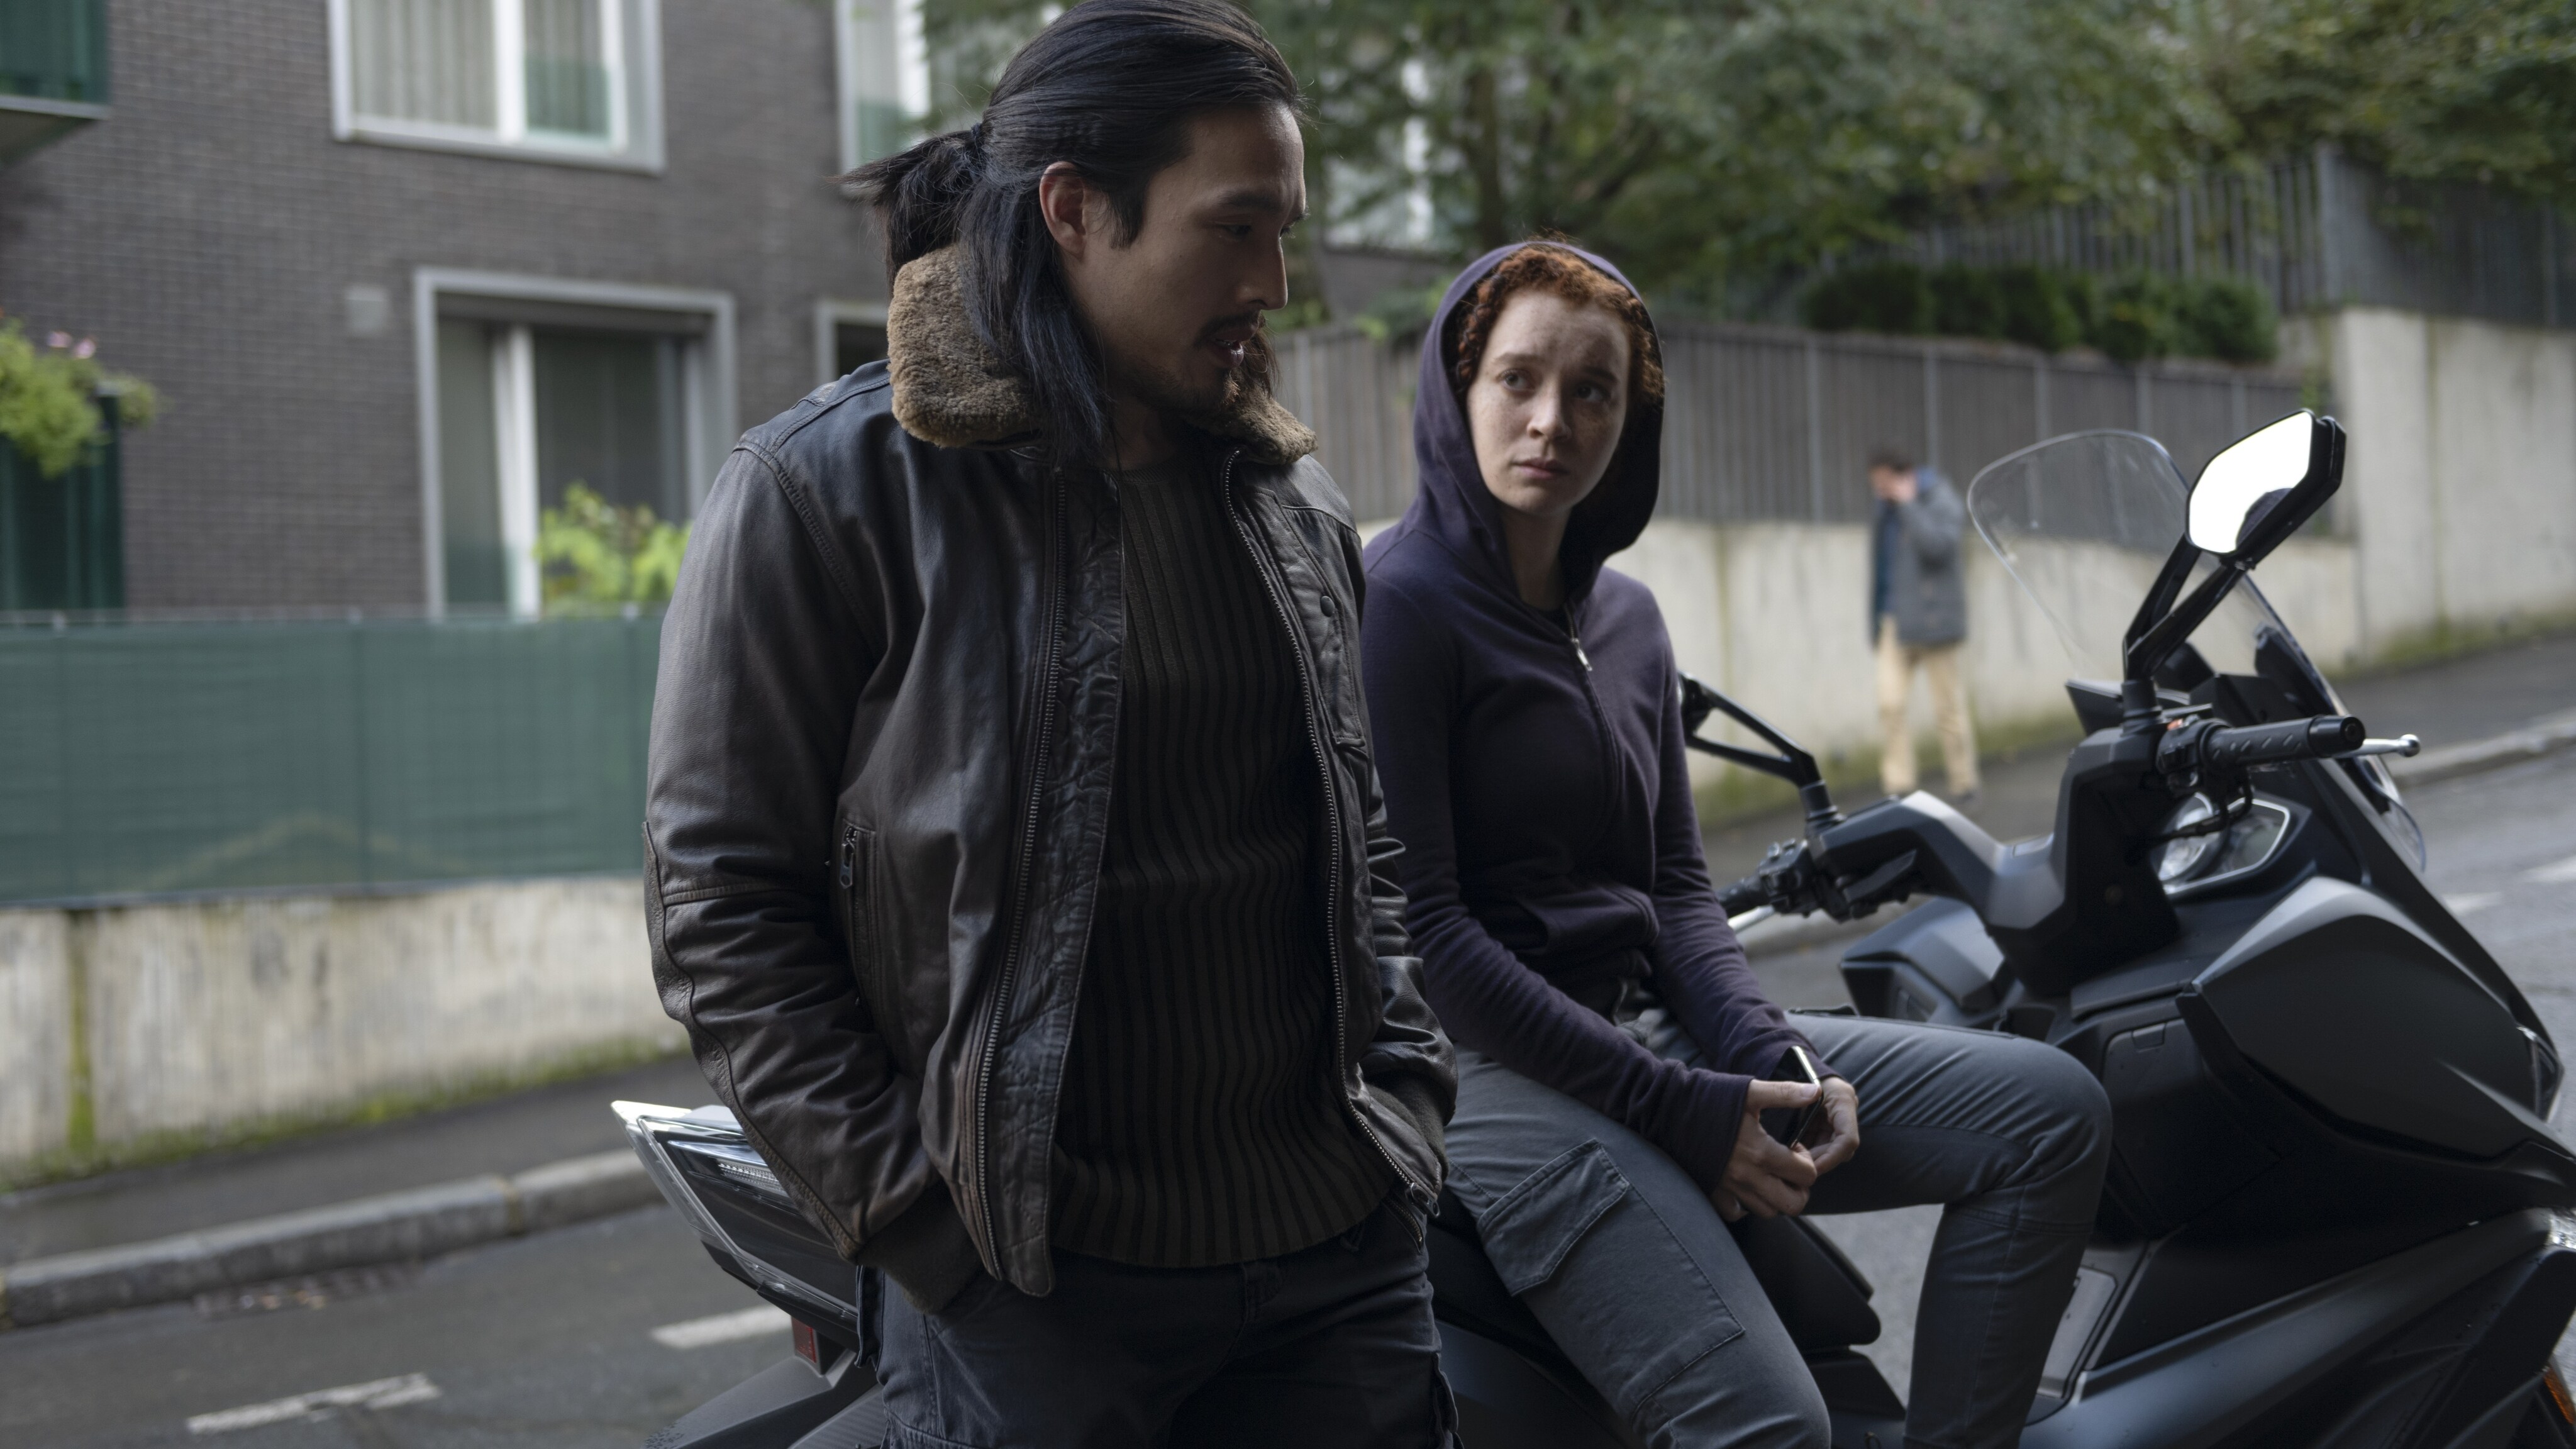 (L-R): Dovich (Desmond Chiam) and Karli Morgenthau (Erin Kellyman) in Marvel Studios' THE FALCON AND THE WINTER SOLDIER exclusively on Disney+. Photo by Julie Vrabelová. ©Marvel Studios 2021. All Rights Reserved. 